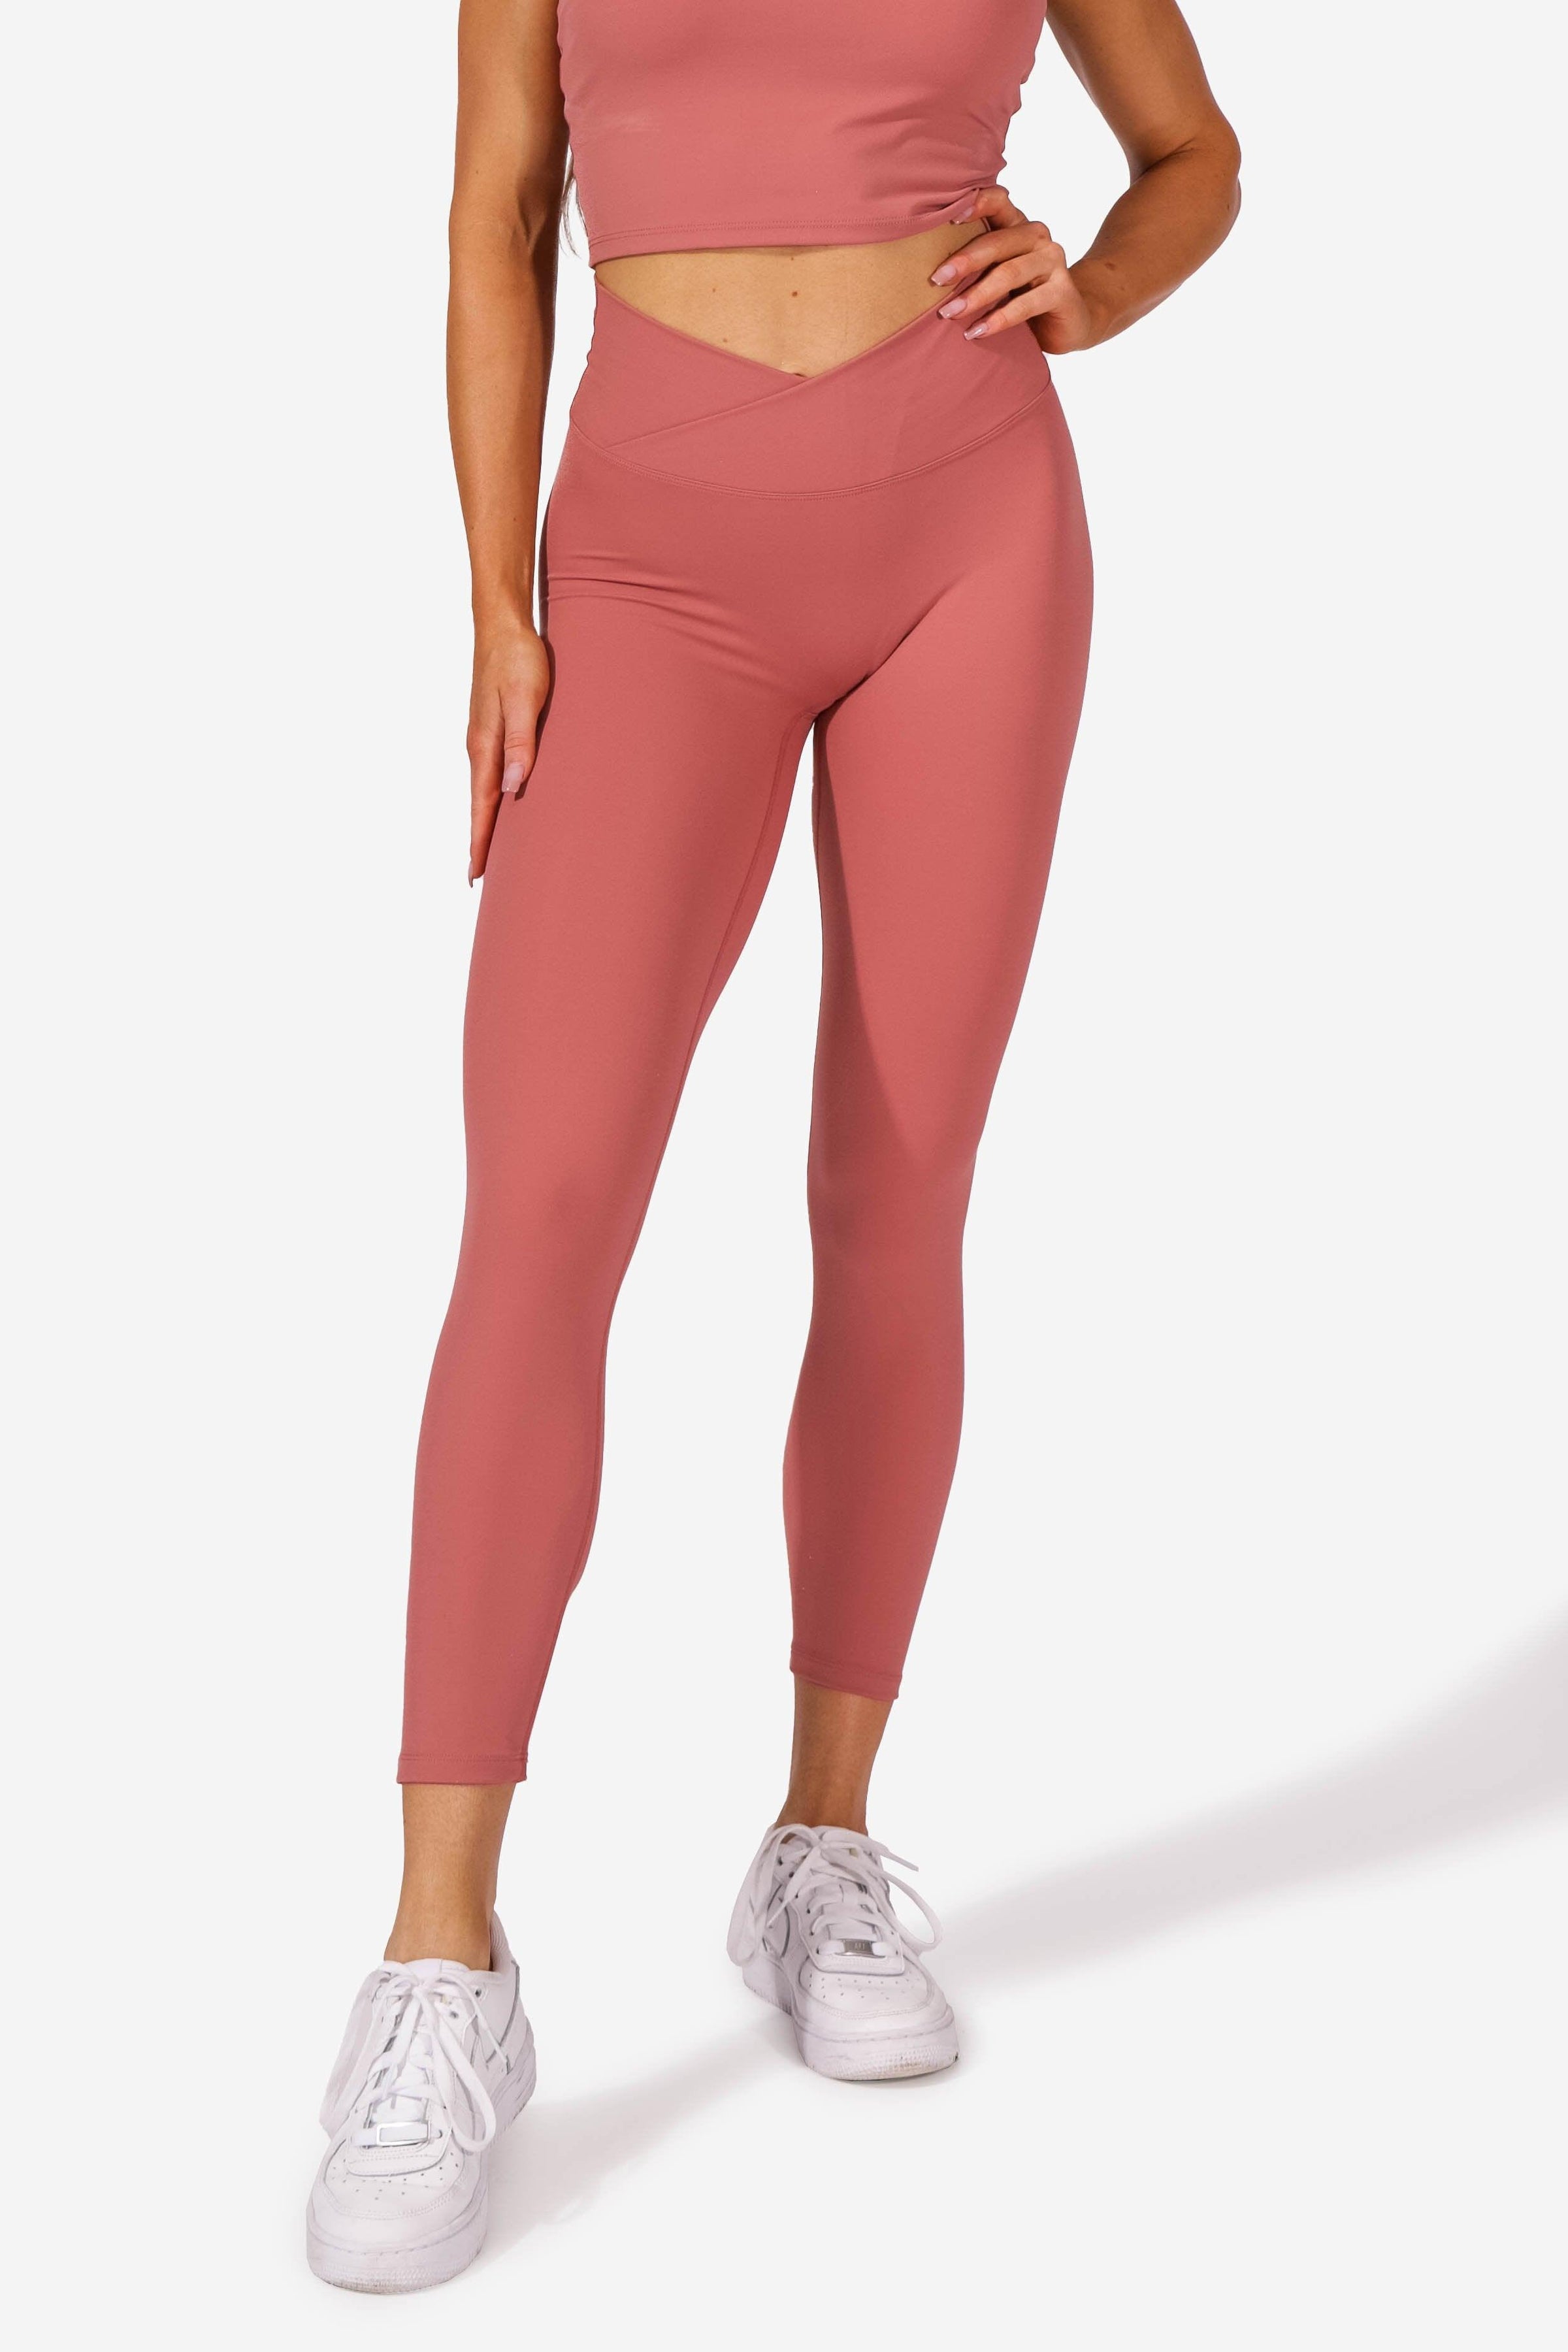 Ruched Crossover Pocket Legging The Fixx Collective, 50% OFF